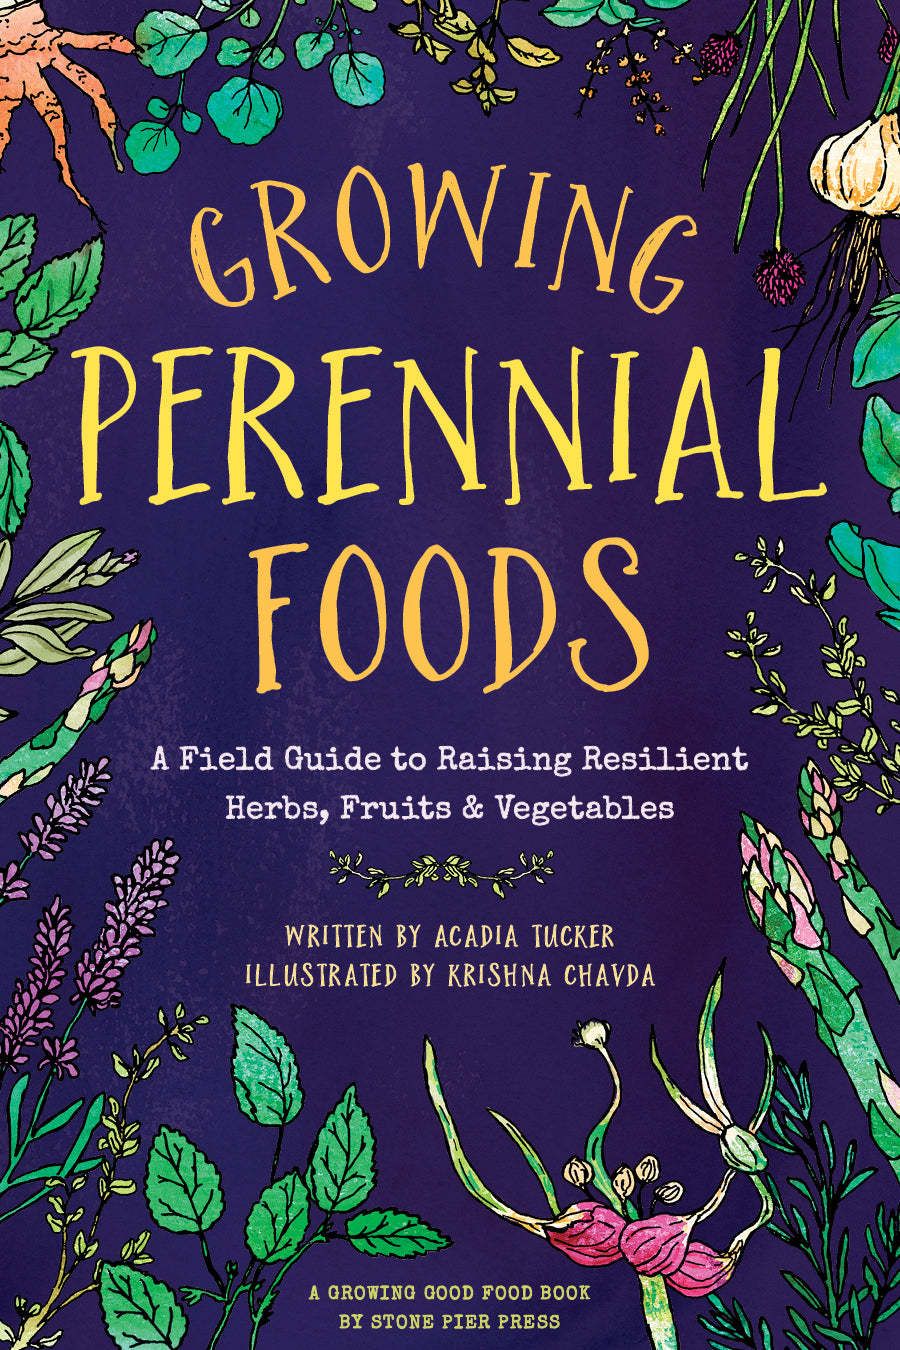 Purple background book cover with green herbs and vegetables circling the edges, "growing perennial foods" in big orange and yellow handwritten font in the top center, "a field guide to raising resilient herbs, fruits and vegetables" in white in center 